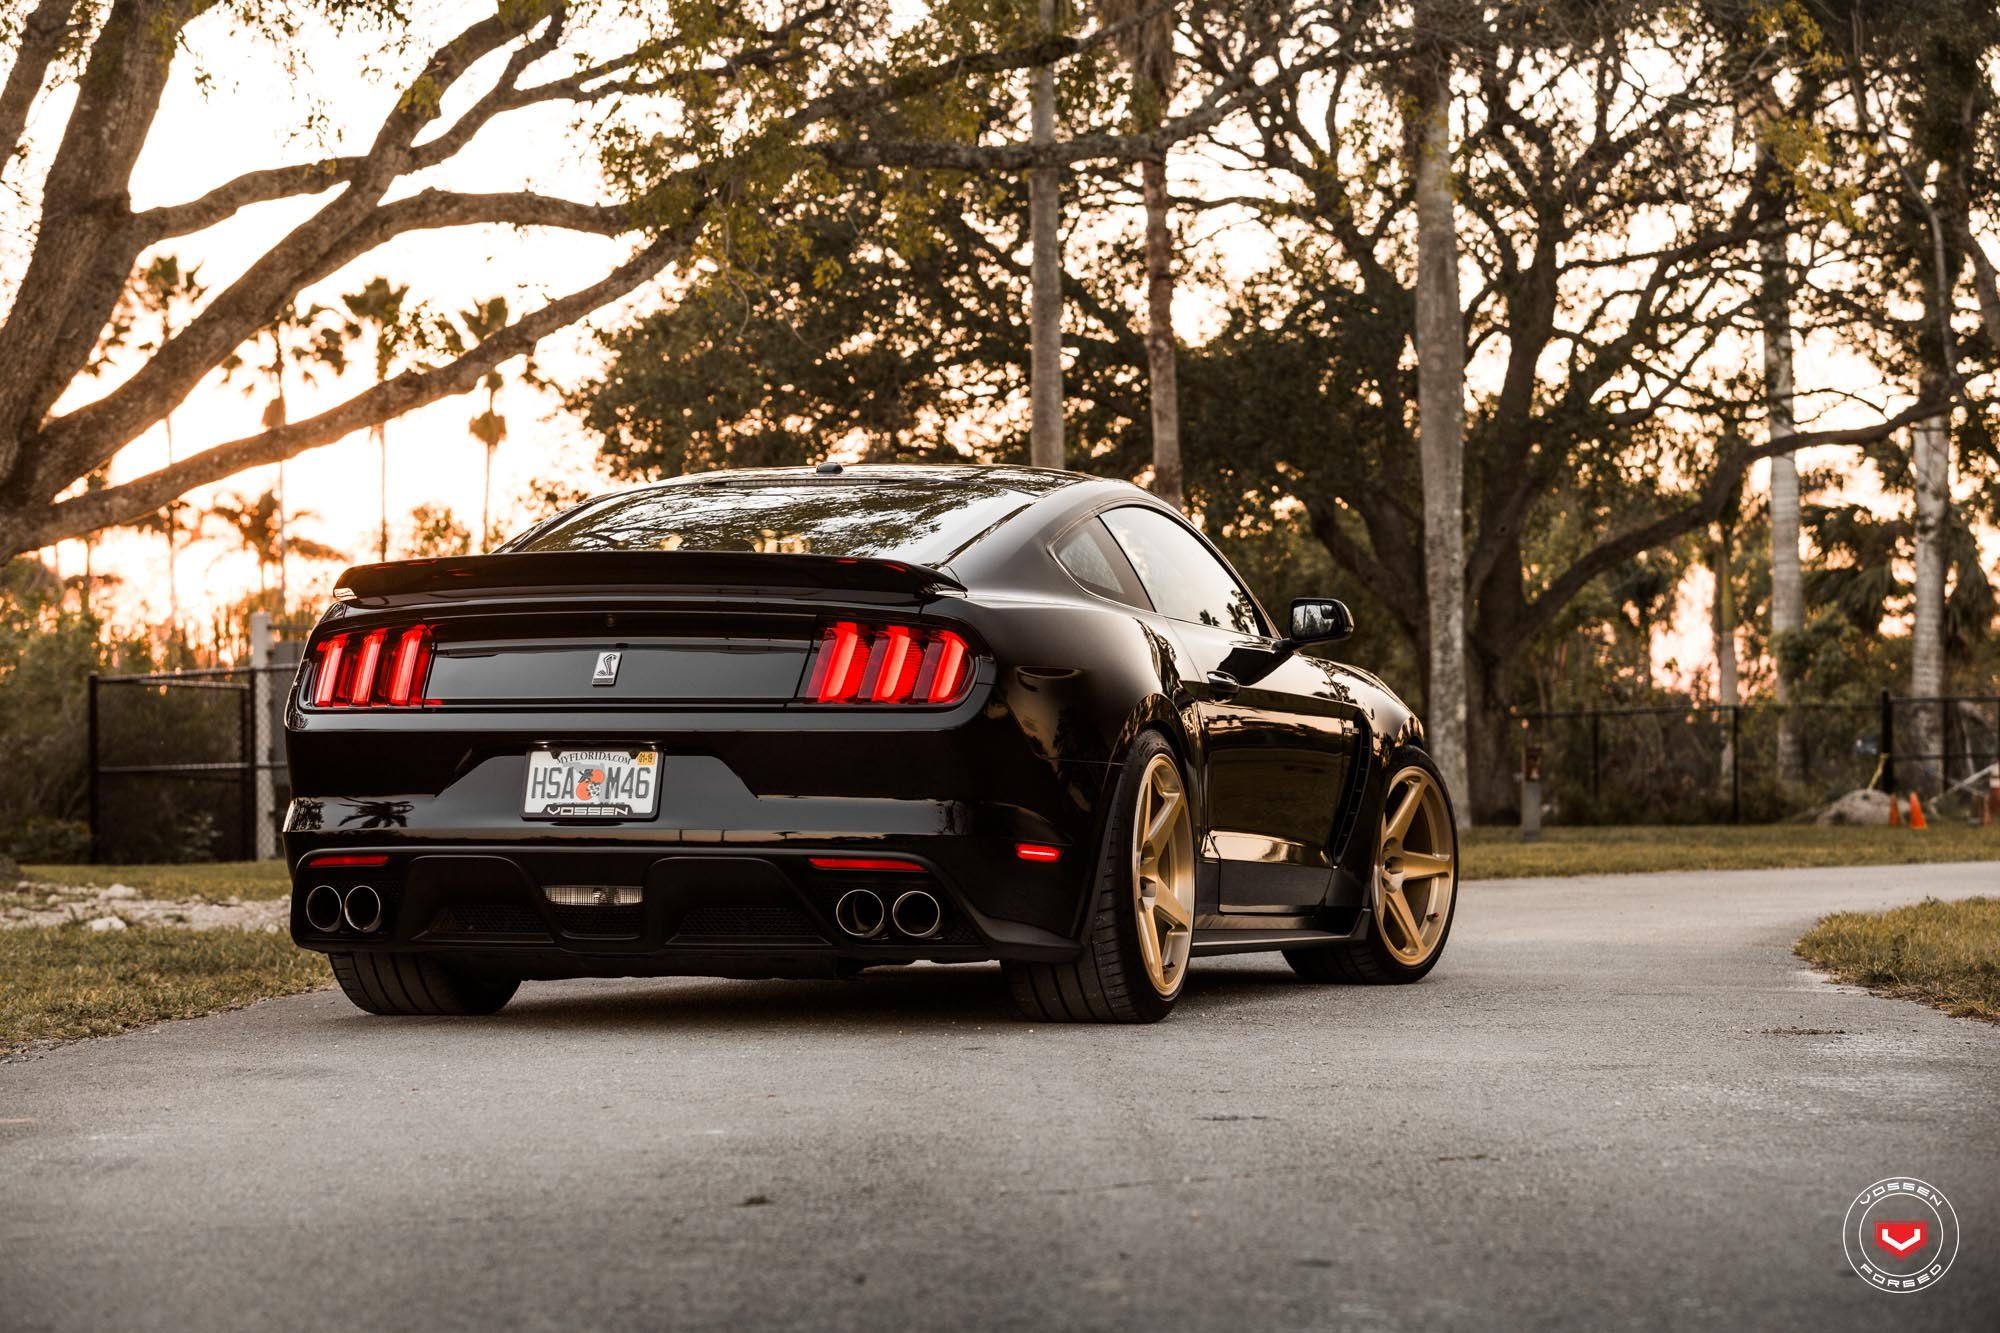 Aftermarket Rear Diffuser on Black Ford Mustang GT350 - Photo by Vossen